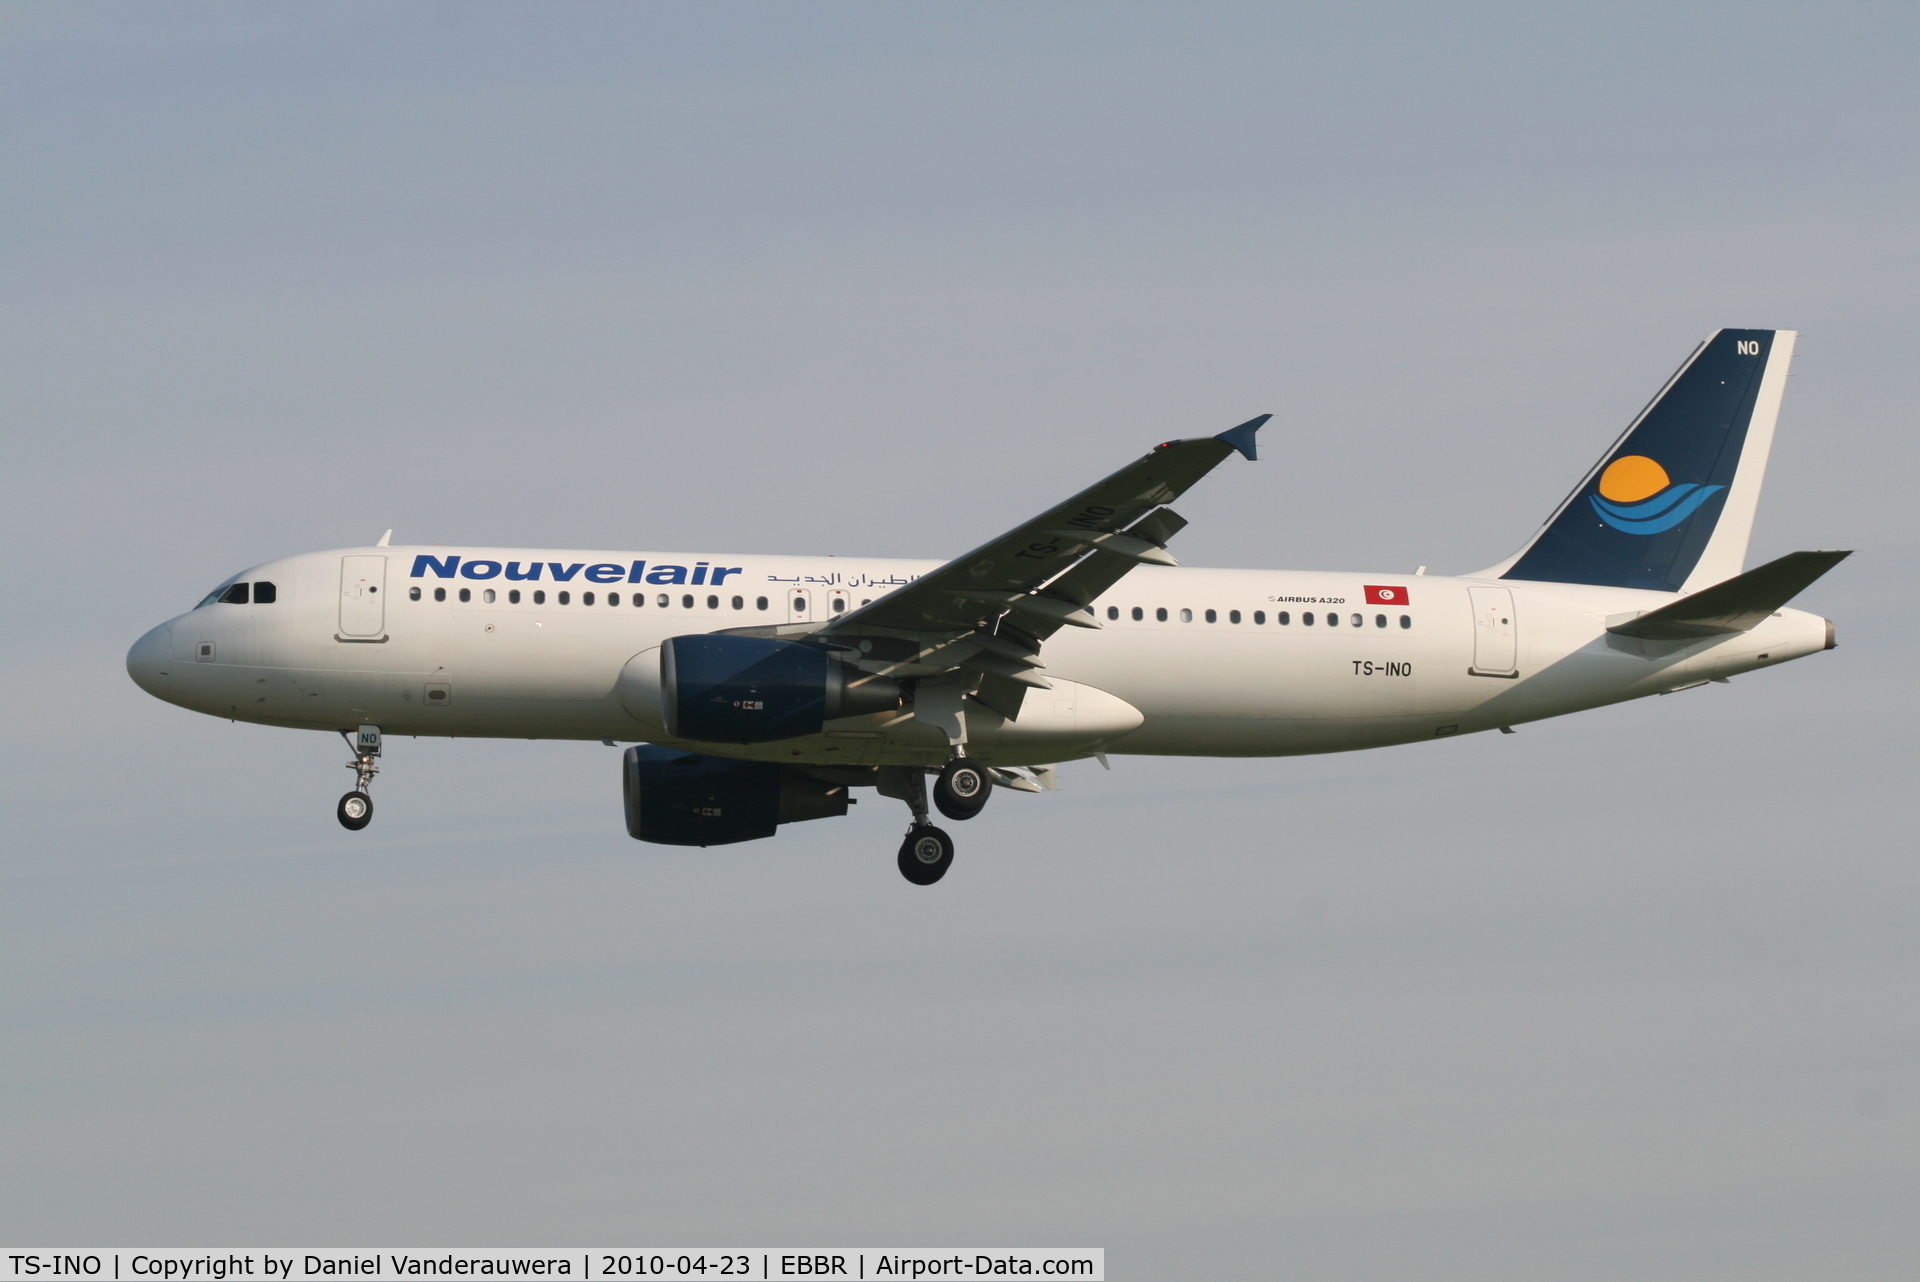 TS-INO, 2008 Airbus A320-214 C/N 3480, Arrival of flight BJ5192 to RWY 25L